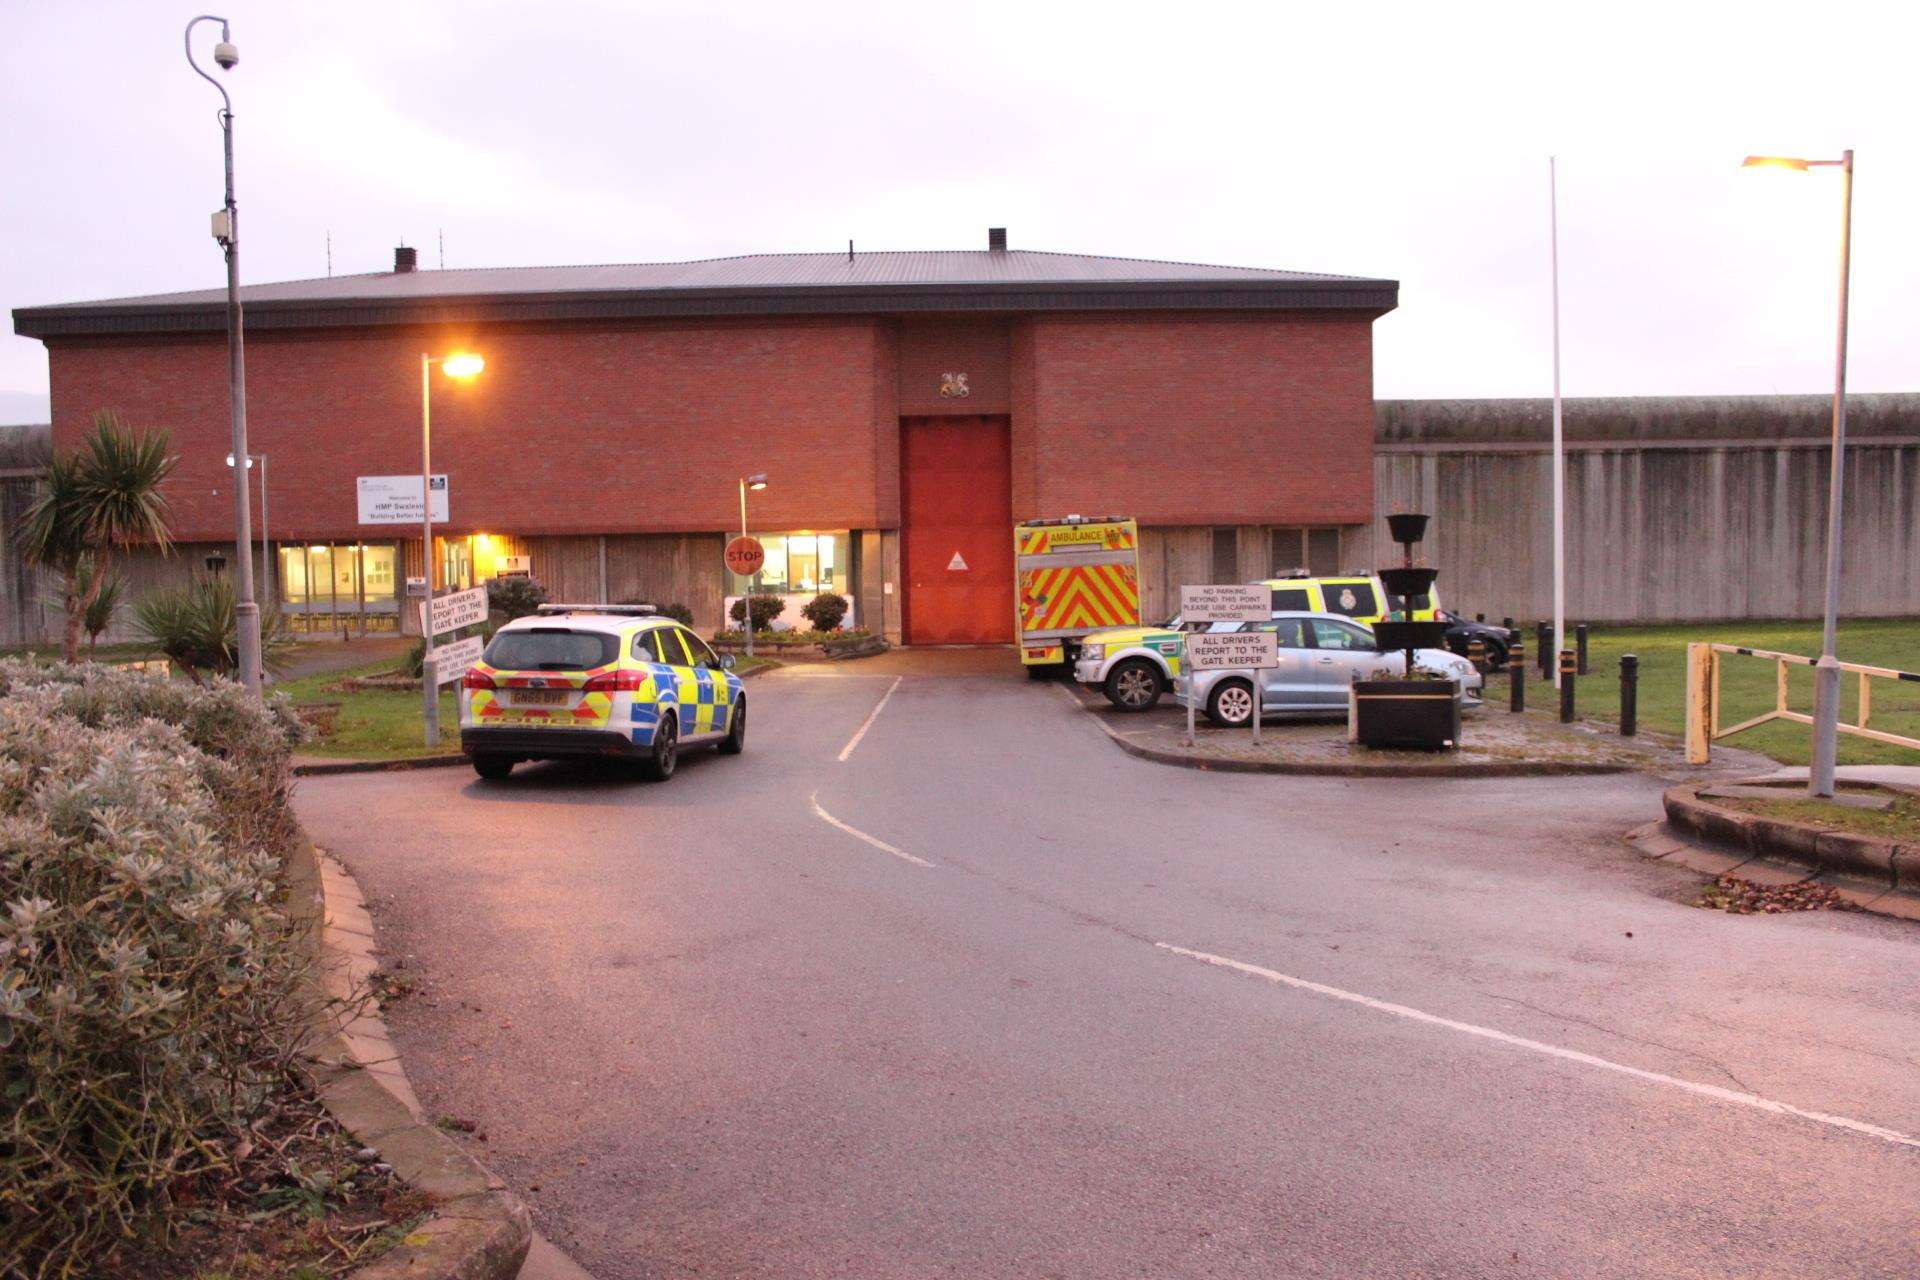 Ambulances on standby during a riot inside HMP Swaleside in Eastchurch, Sheppey, in December last year